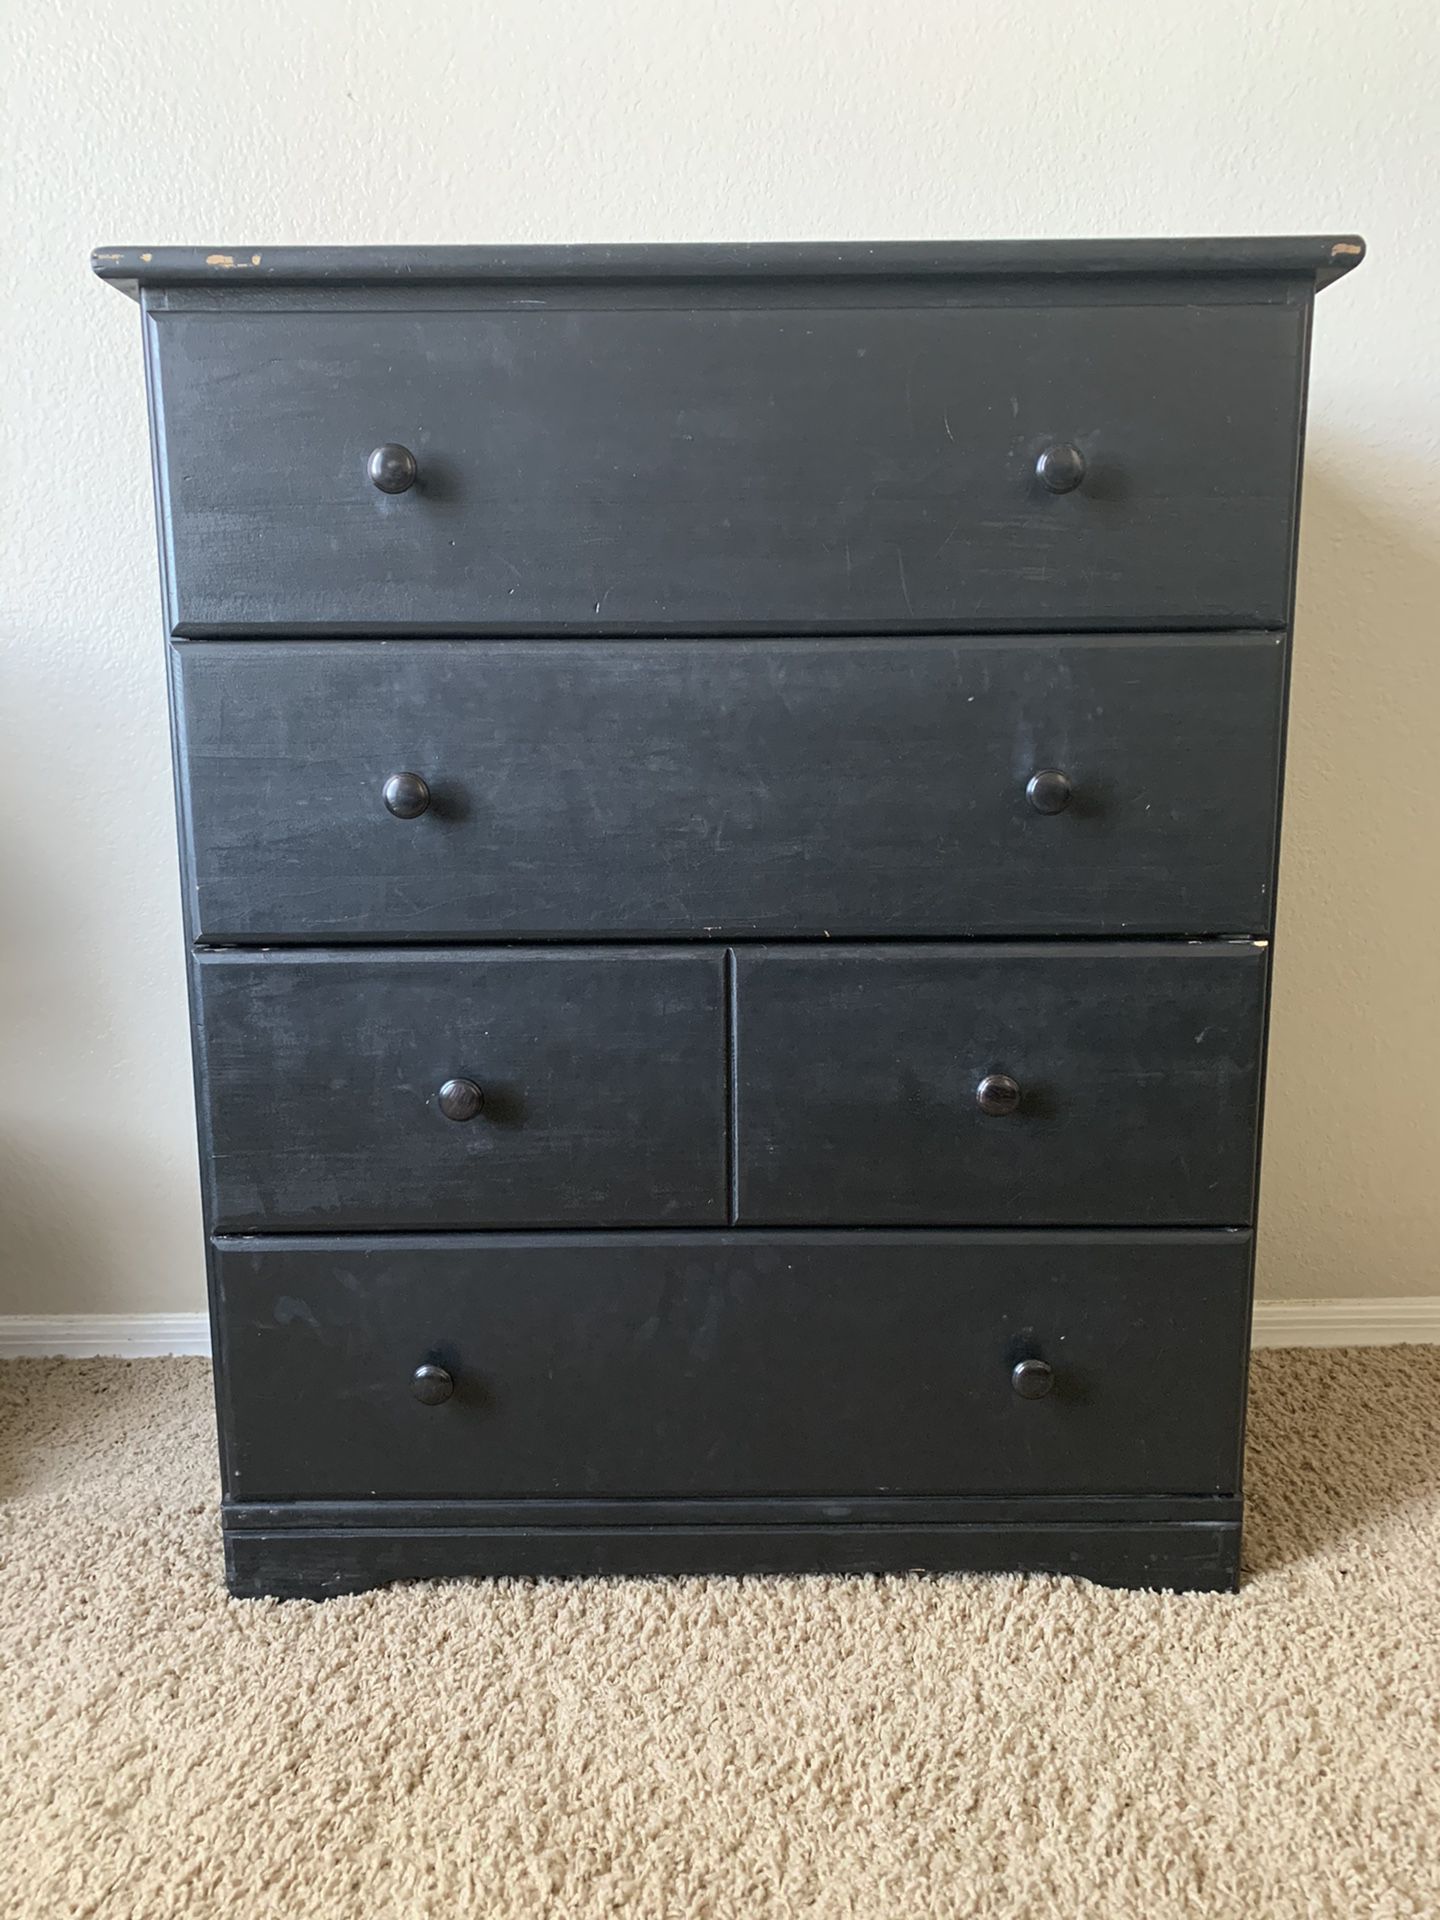 MOVING! Must sell! 4 drawer dresser